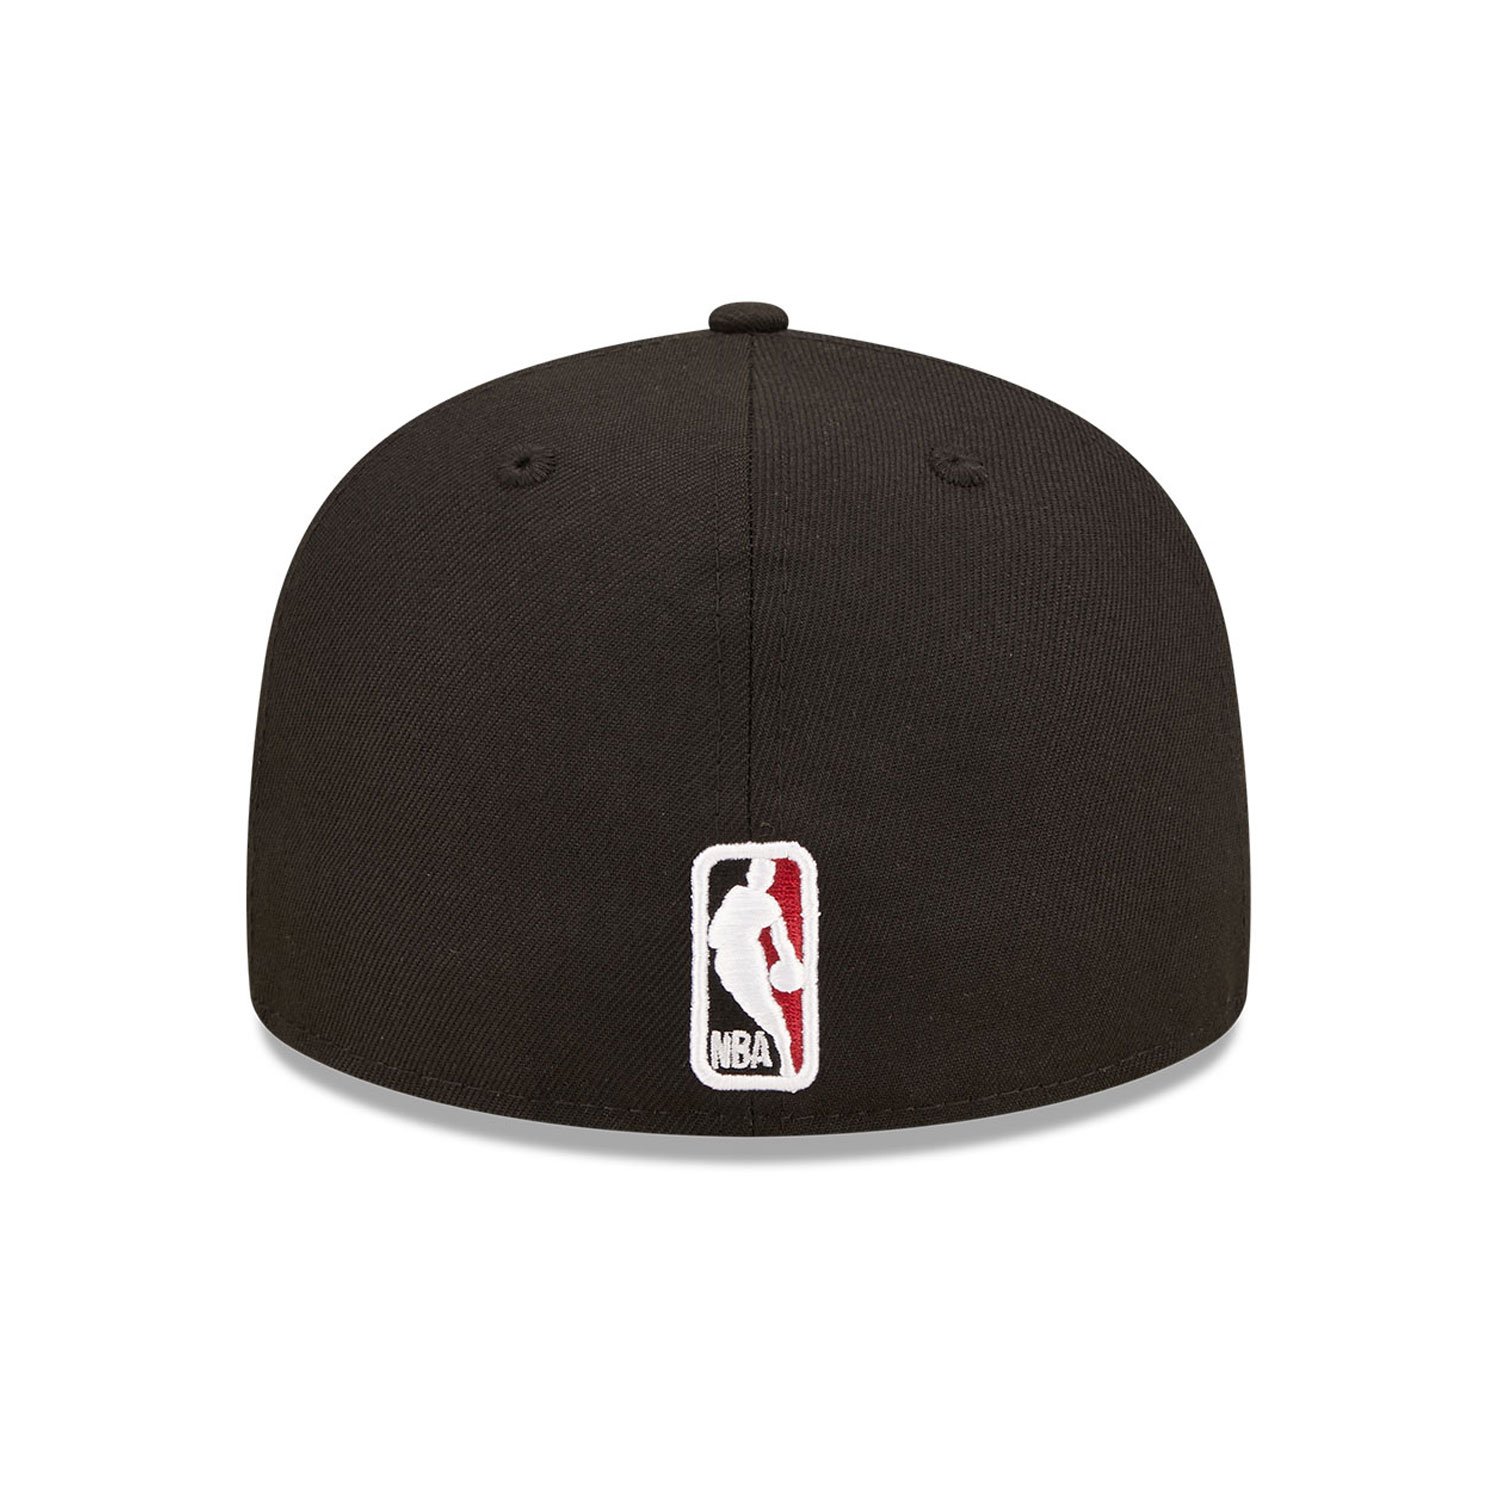 Miami Heat Roller Black 59FIFTY Fitted Cap